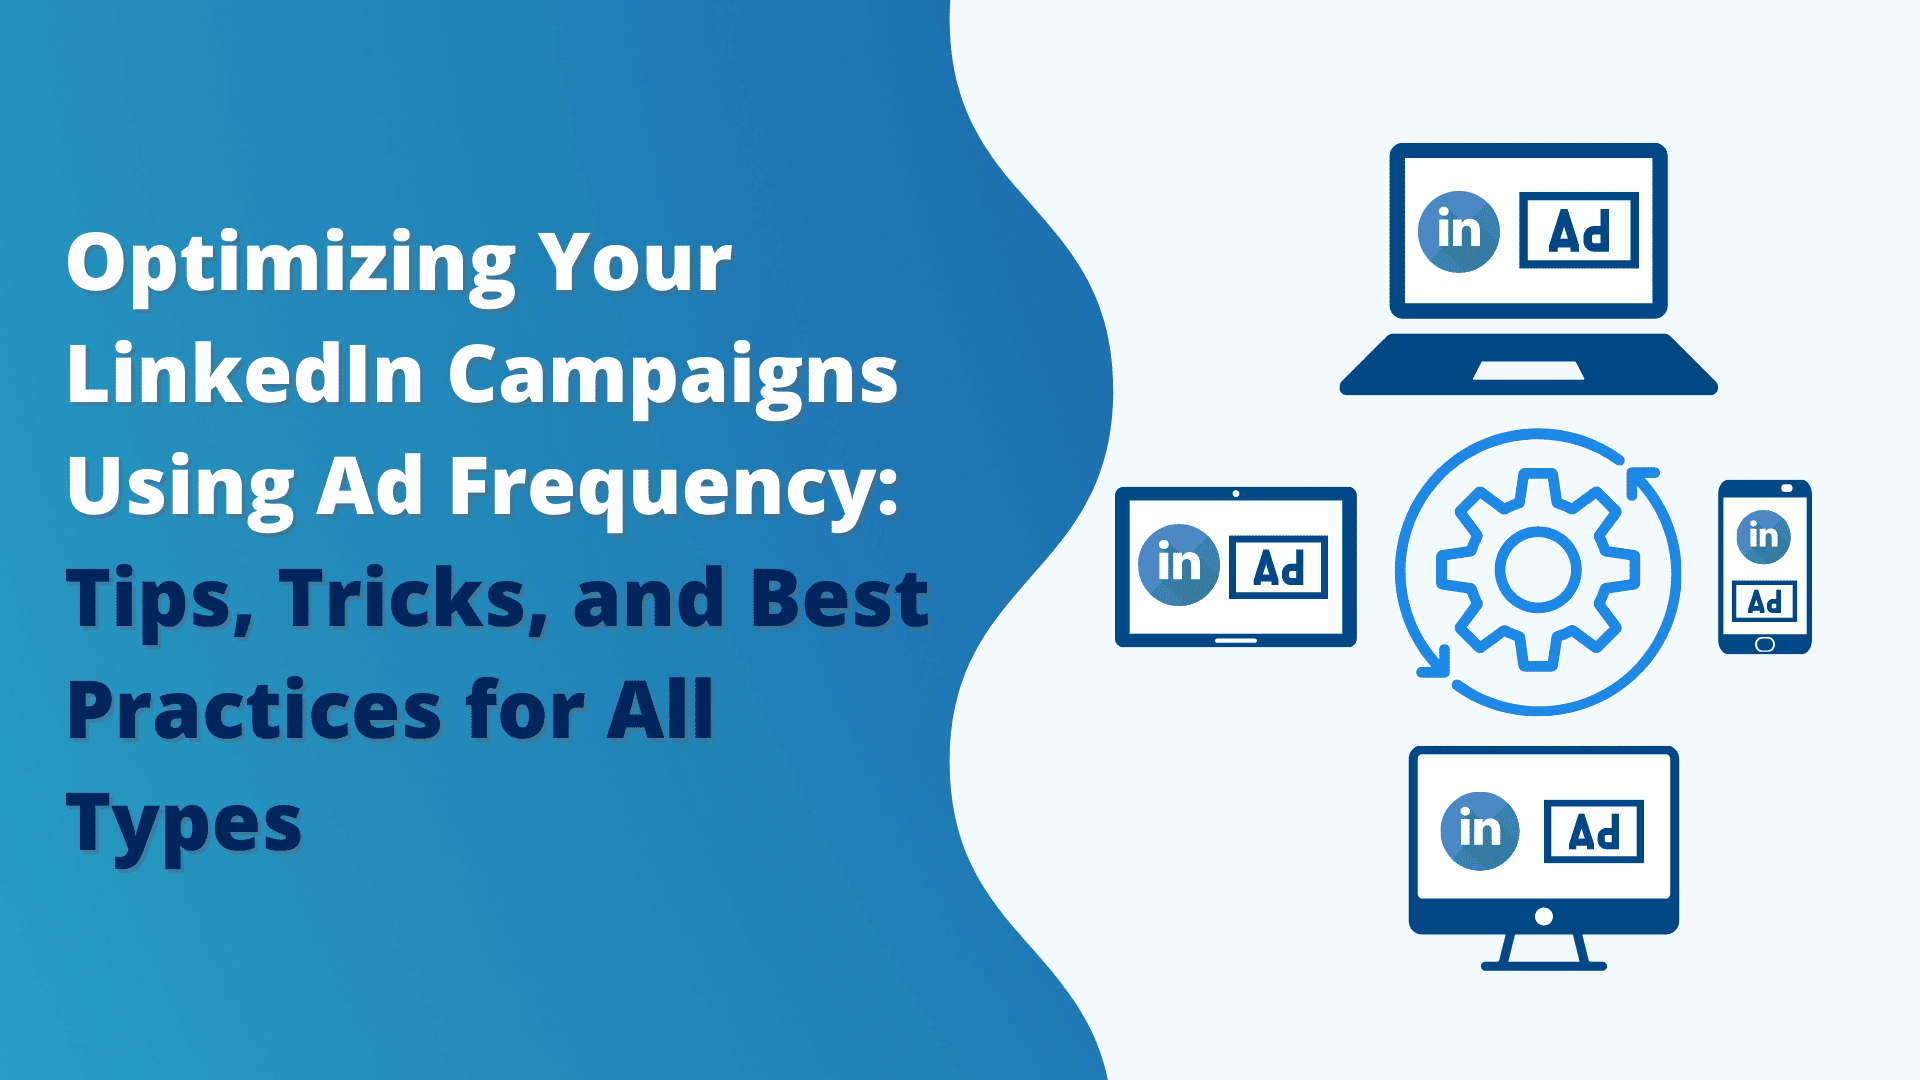 Optimizing Your LinkedIn Campaigns Using Ad Frequency